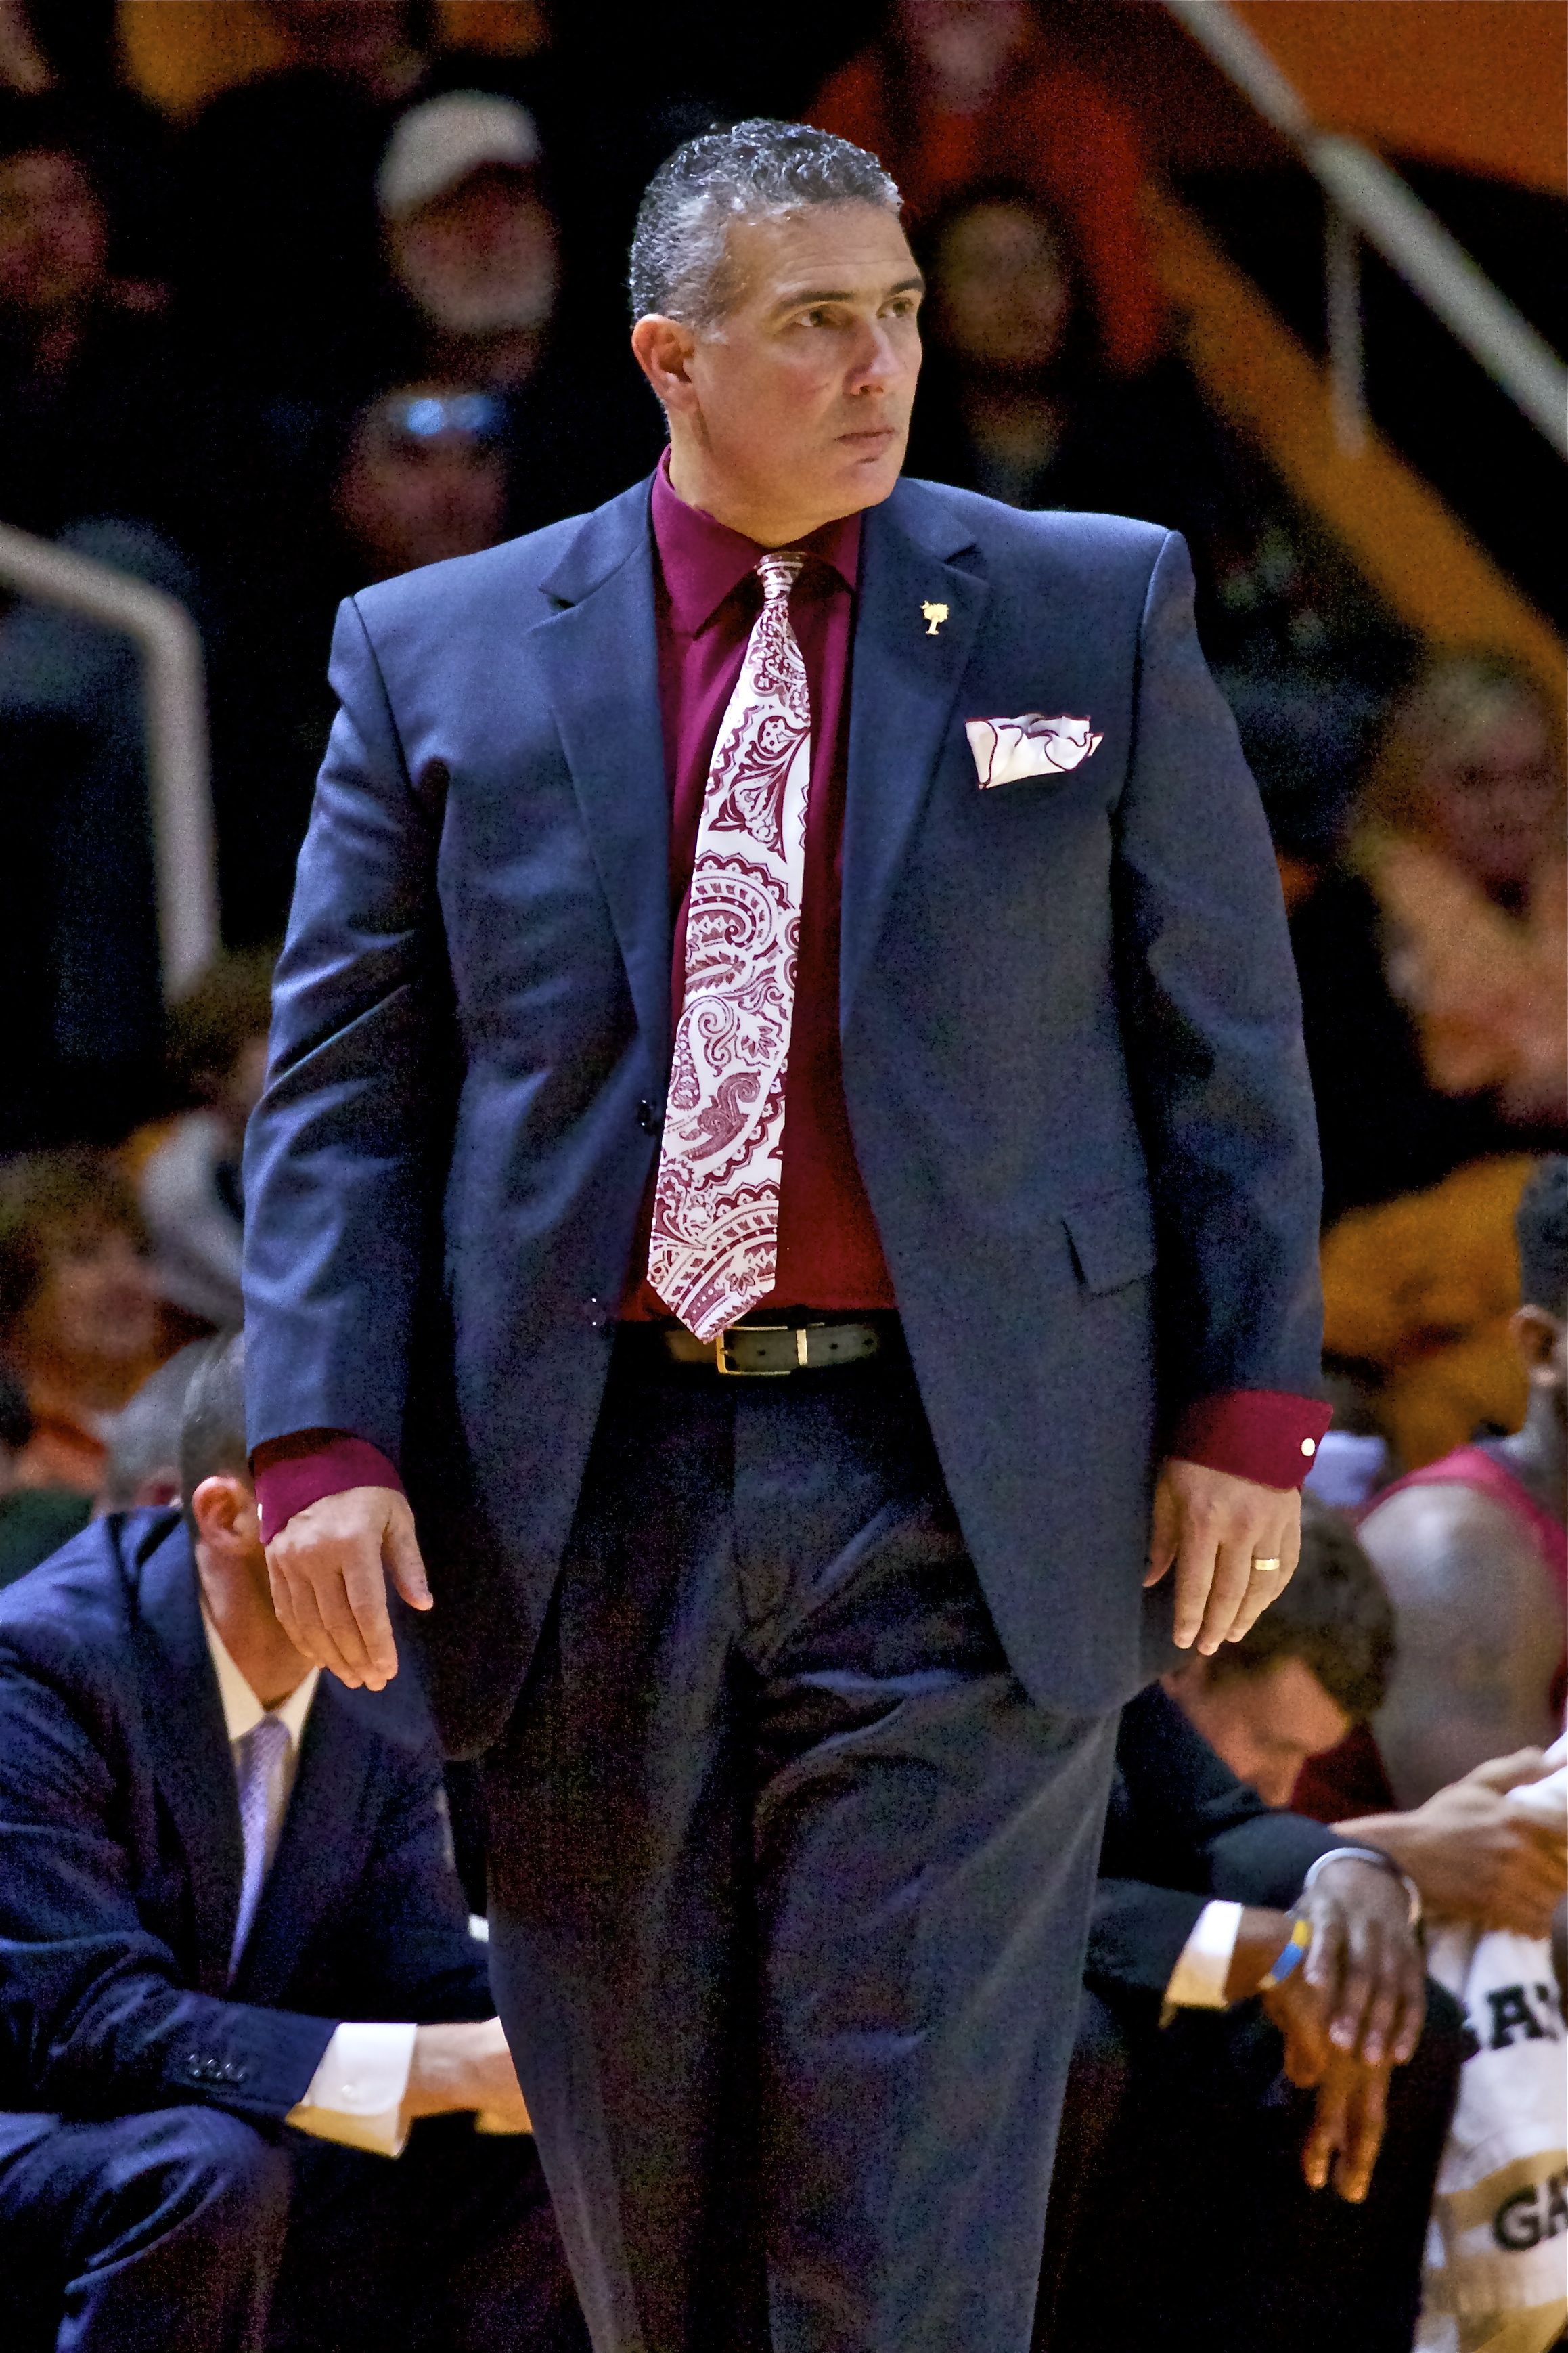 SC coach Frank Martin: “I’ll tell you what’s awesome, is for Rick Barnes to be in our conference”